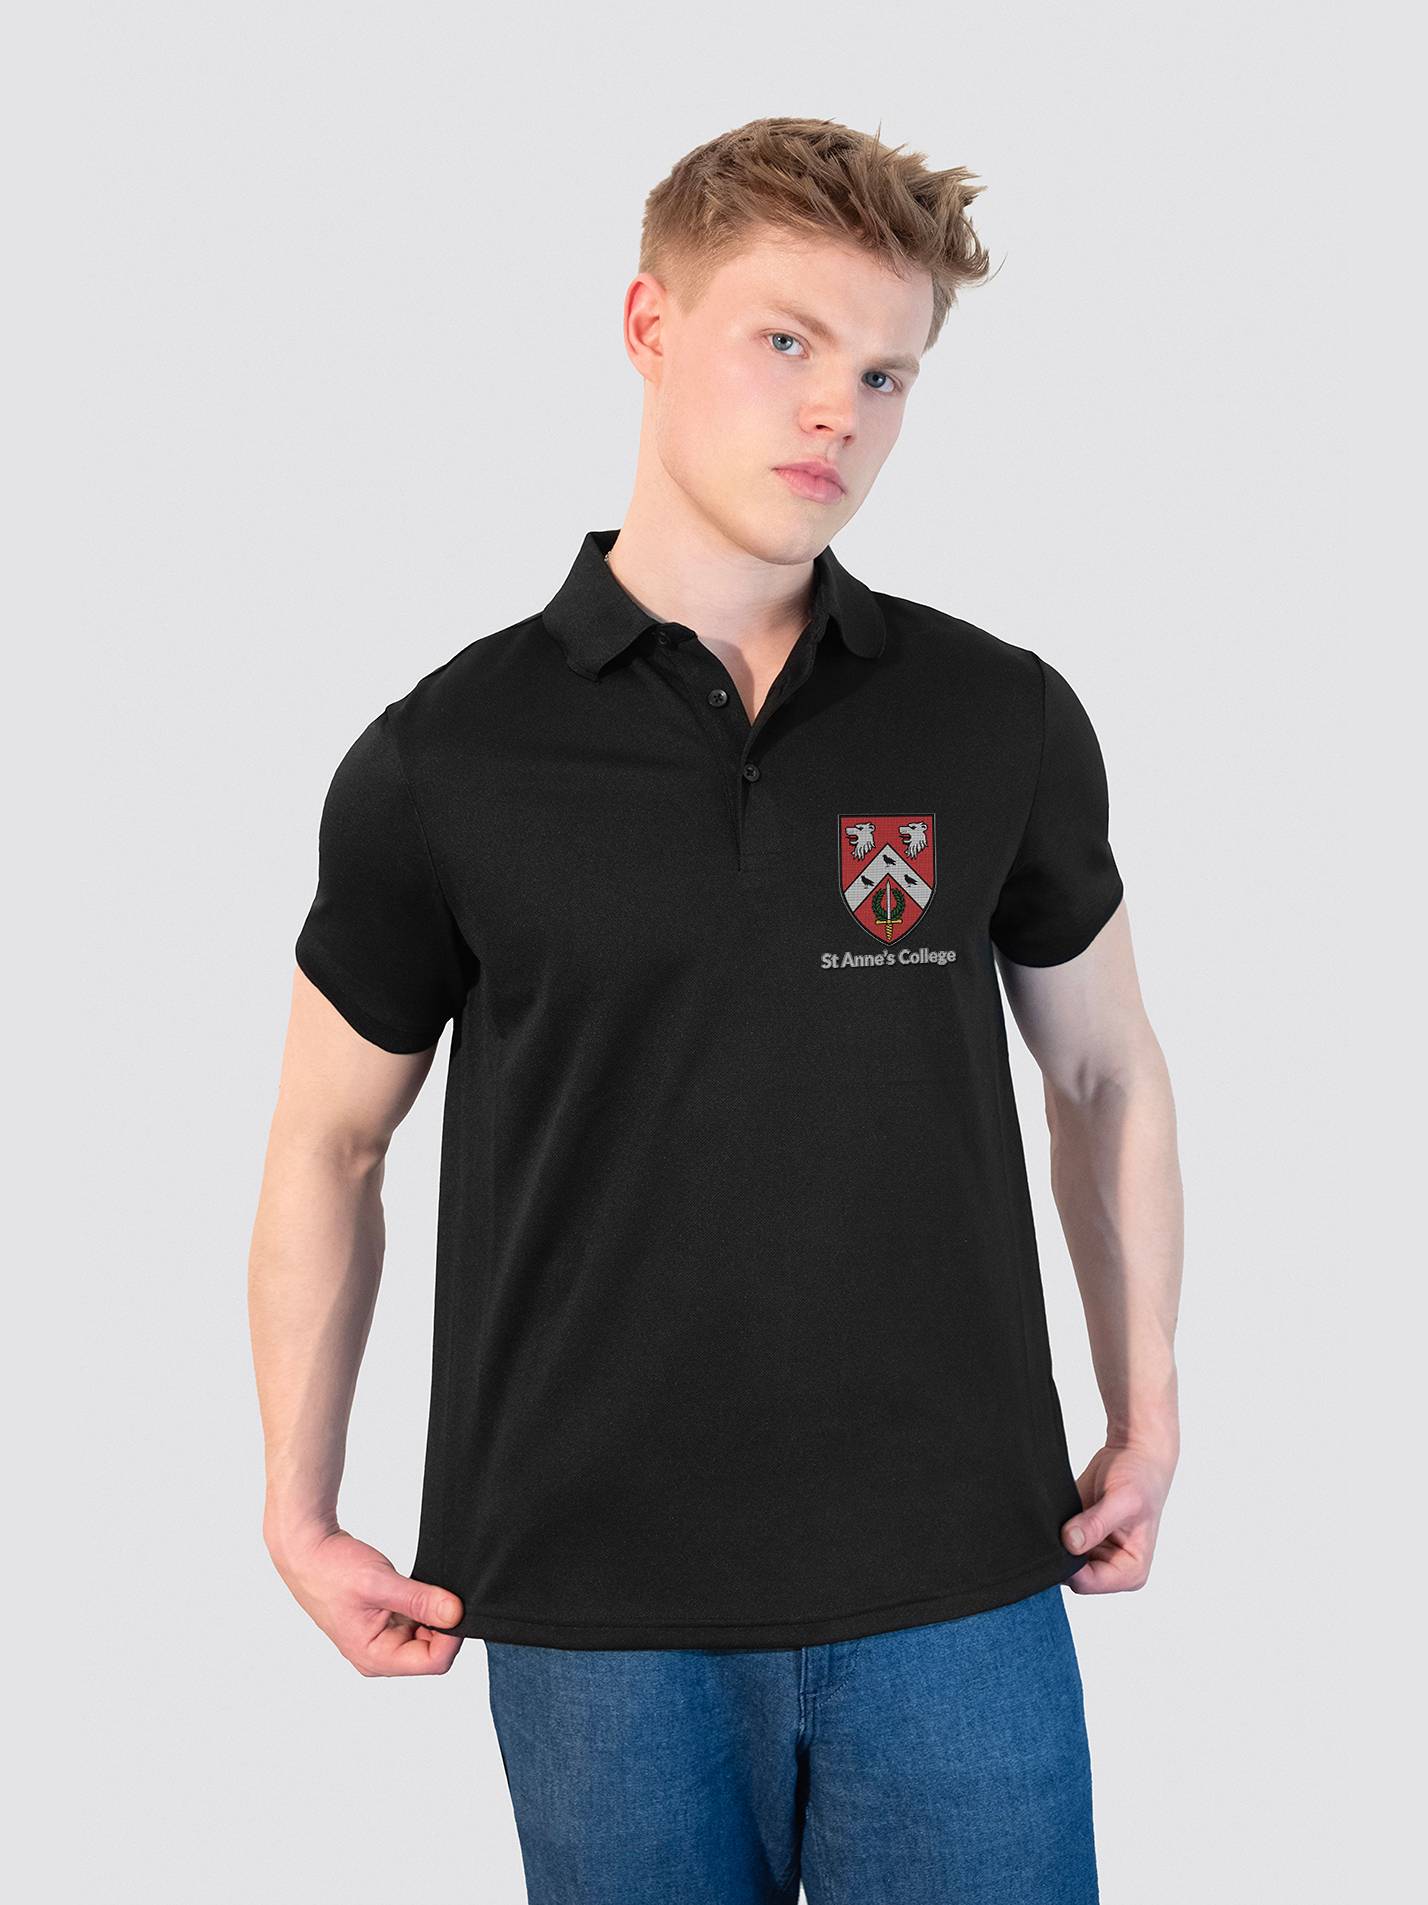 St Anne's College Oxford Sustainable Men's Polo Shirt